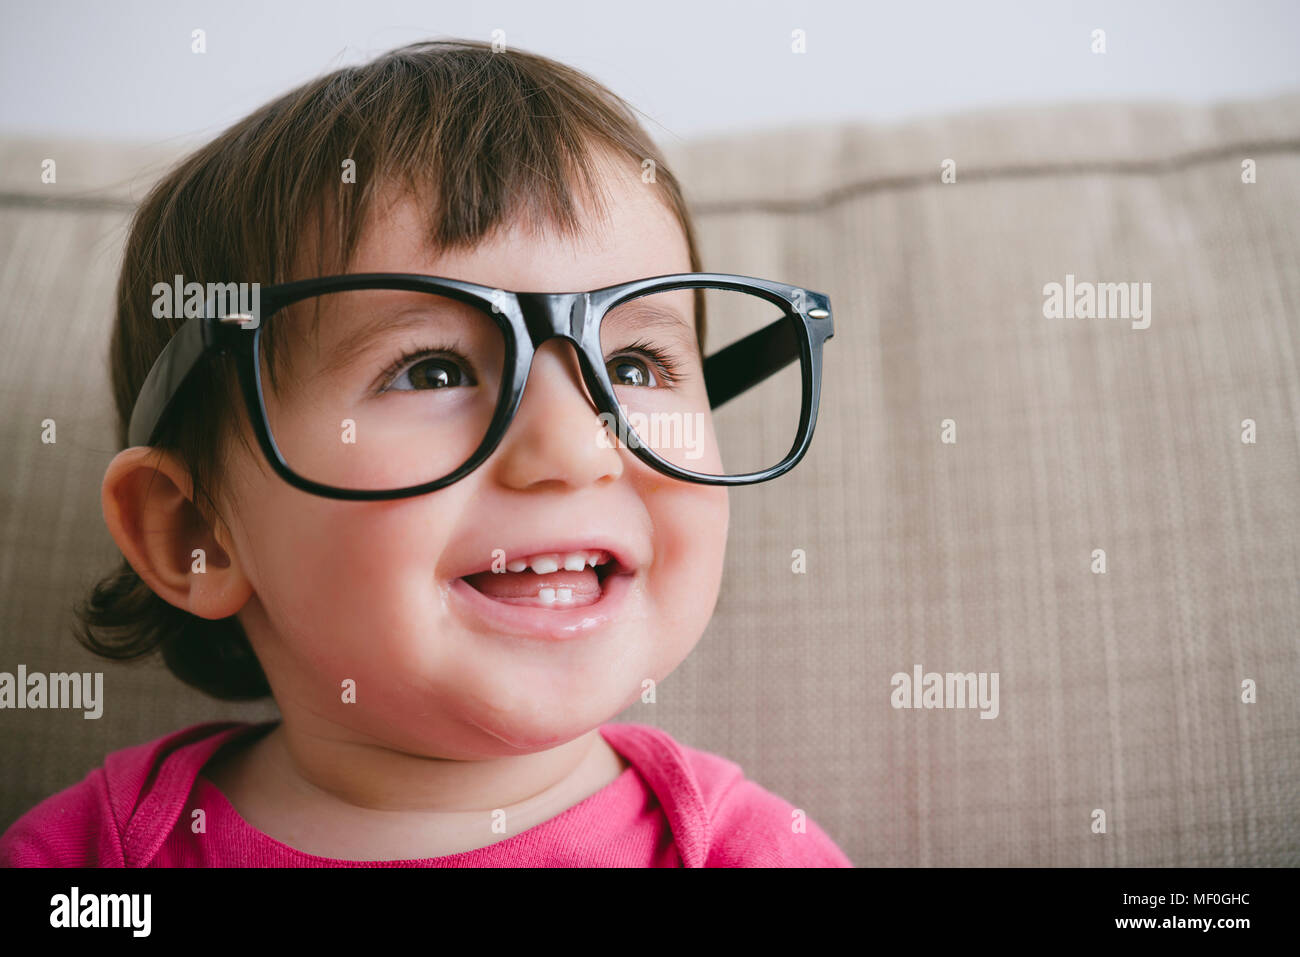 Portrait of laughing baby girl wearing oversized glasses Stock Photo